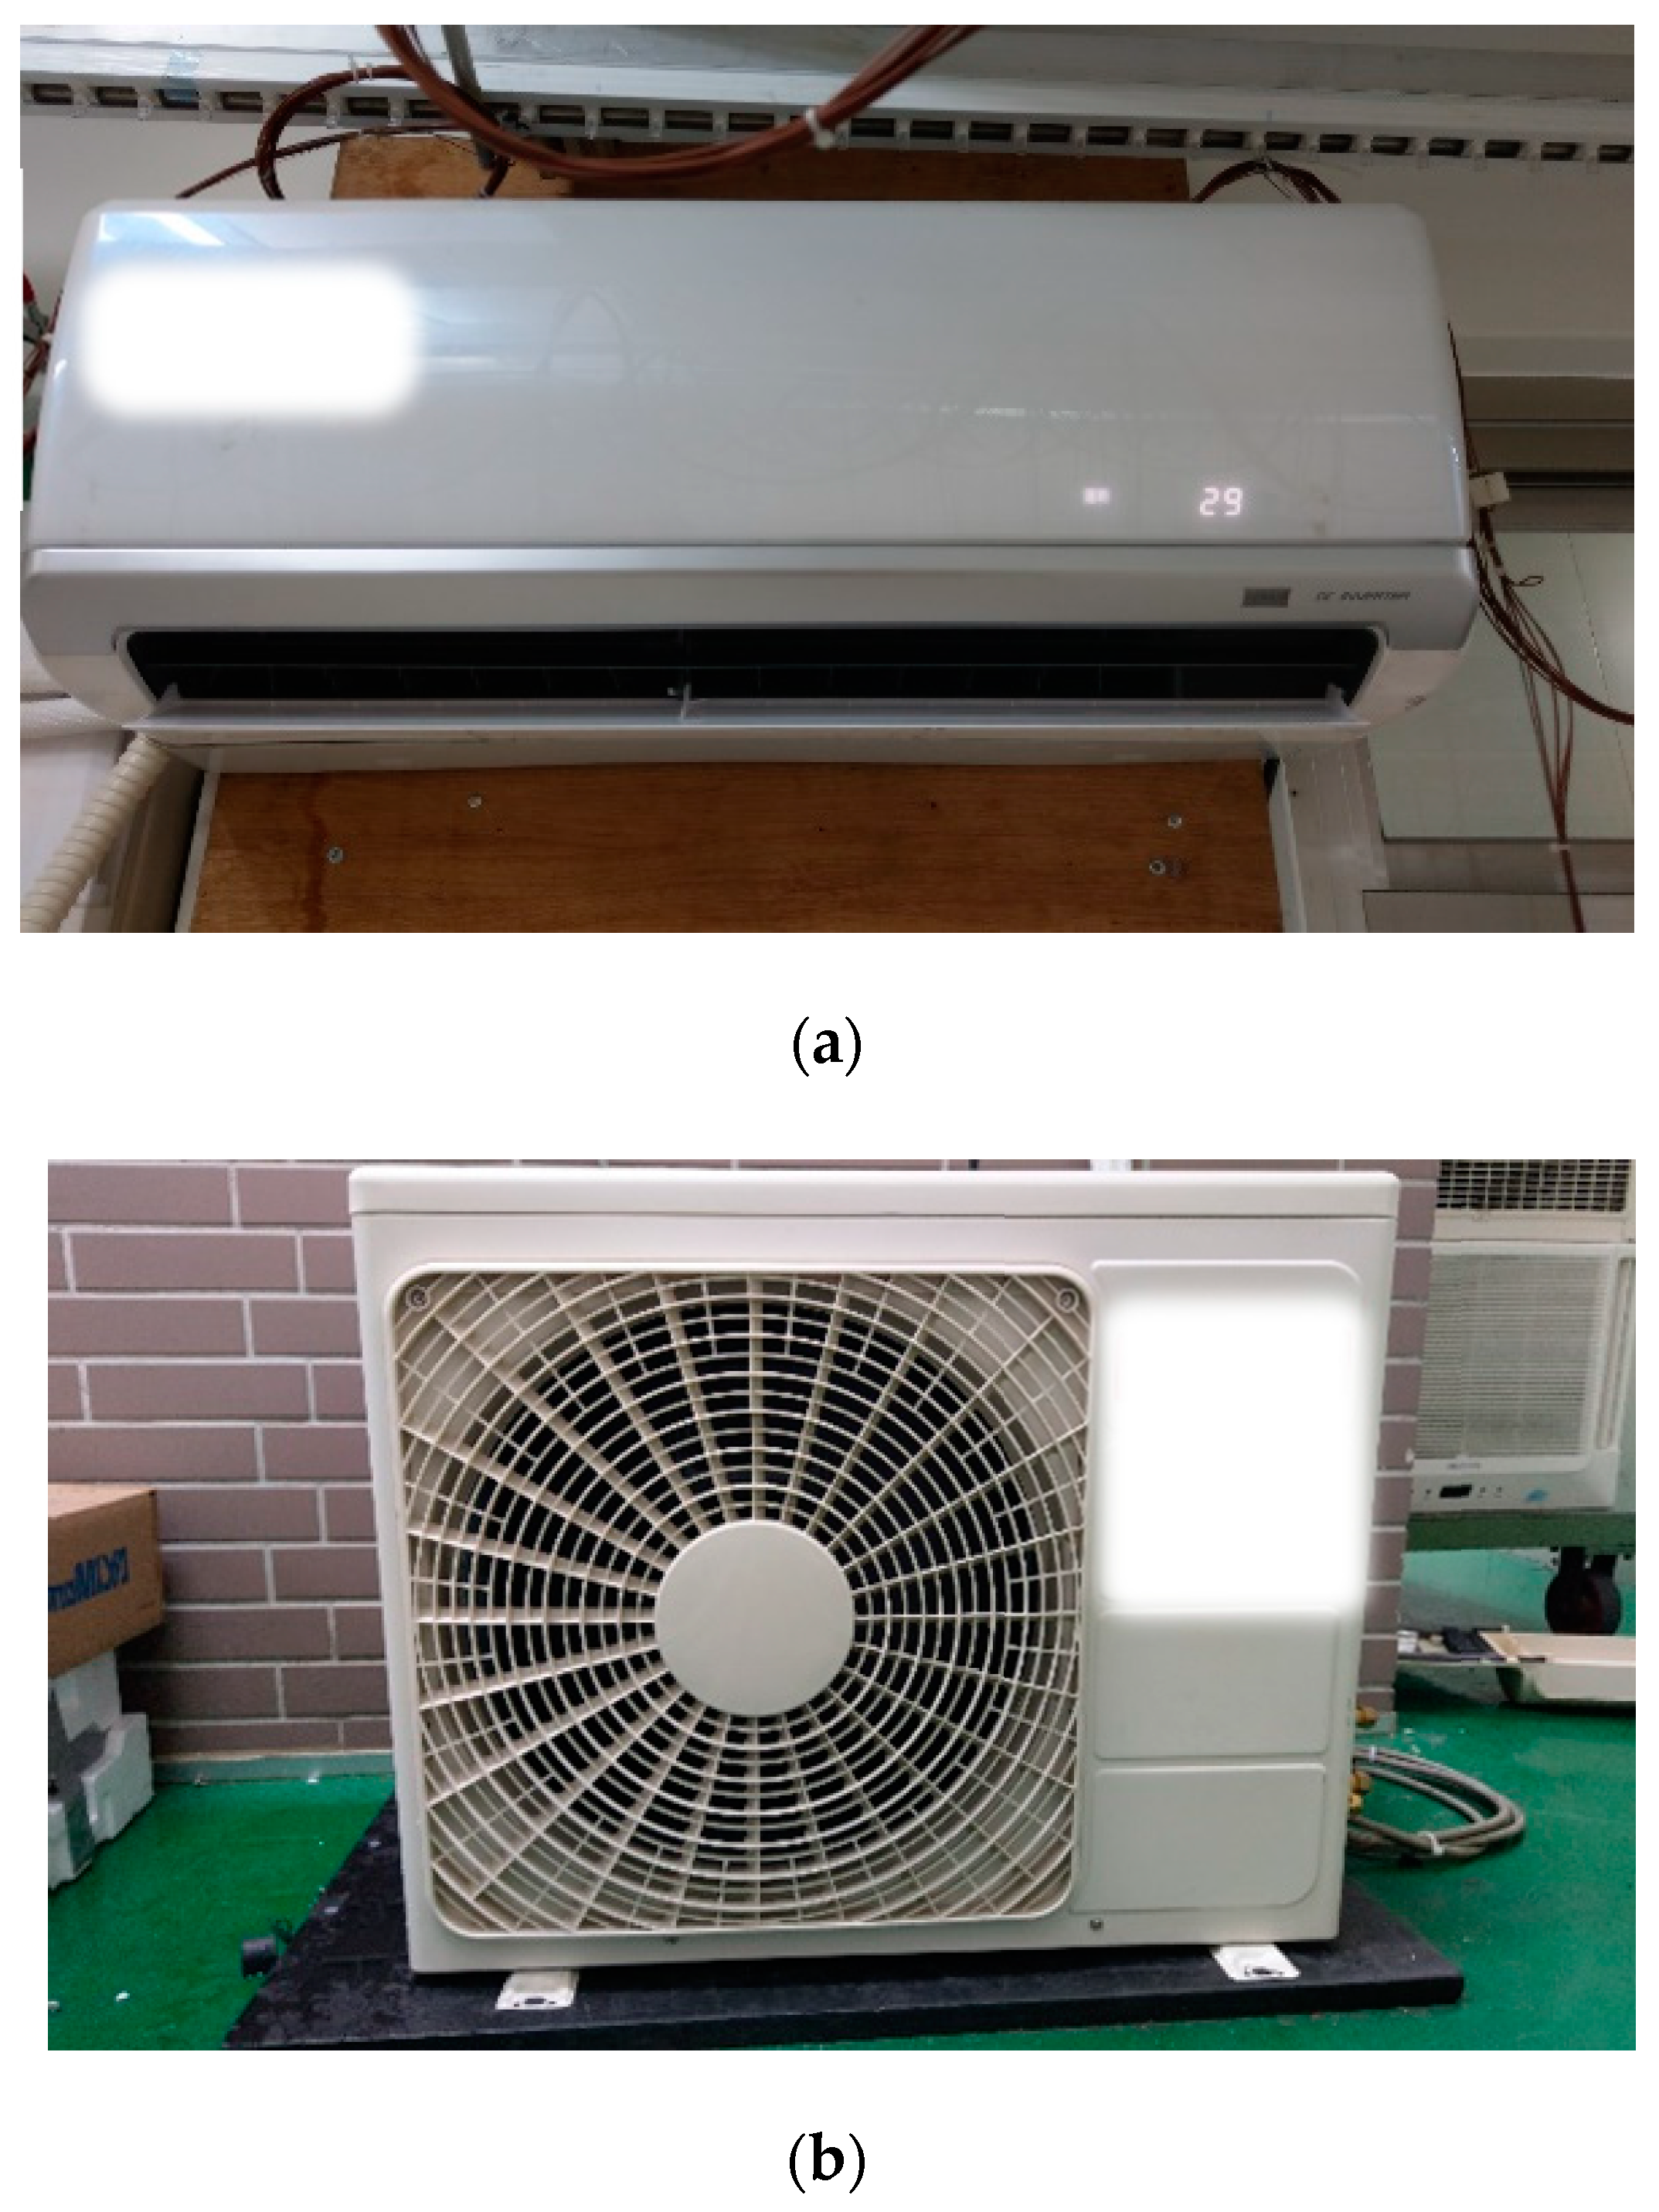 Energies | Free Full-Text | Air Conditioning Energy Saving from Cloud-Based  Artificial Intelligence: Case Study of a Split-Type Air Conditioner | HTML